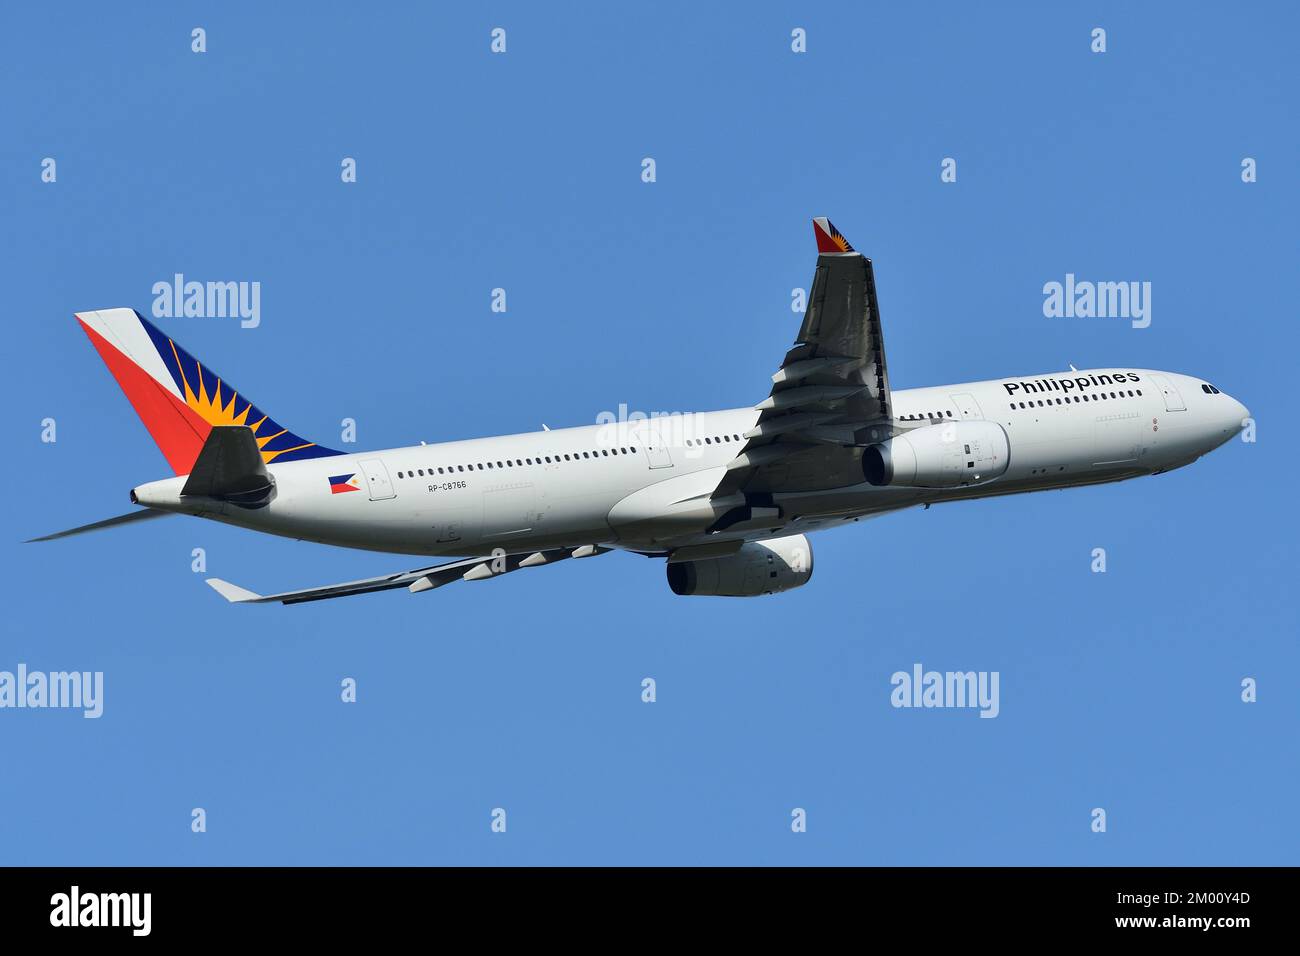 Chiba Prefecture, Japan - May 05, 2019: Philippine Airlines Airbus A330-300 (RP-C8766) passenger plane. Stock Photo